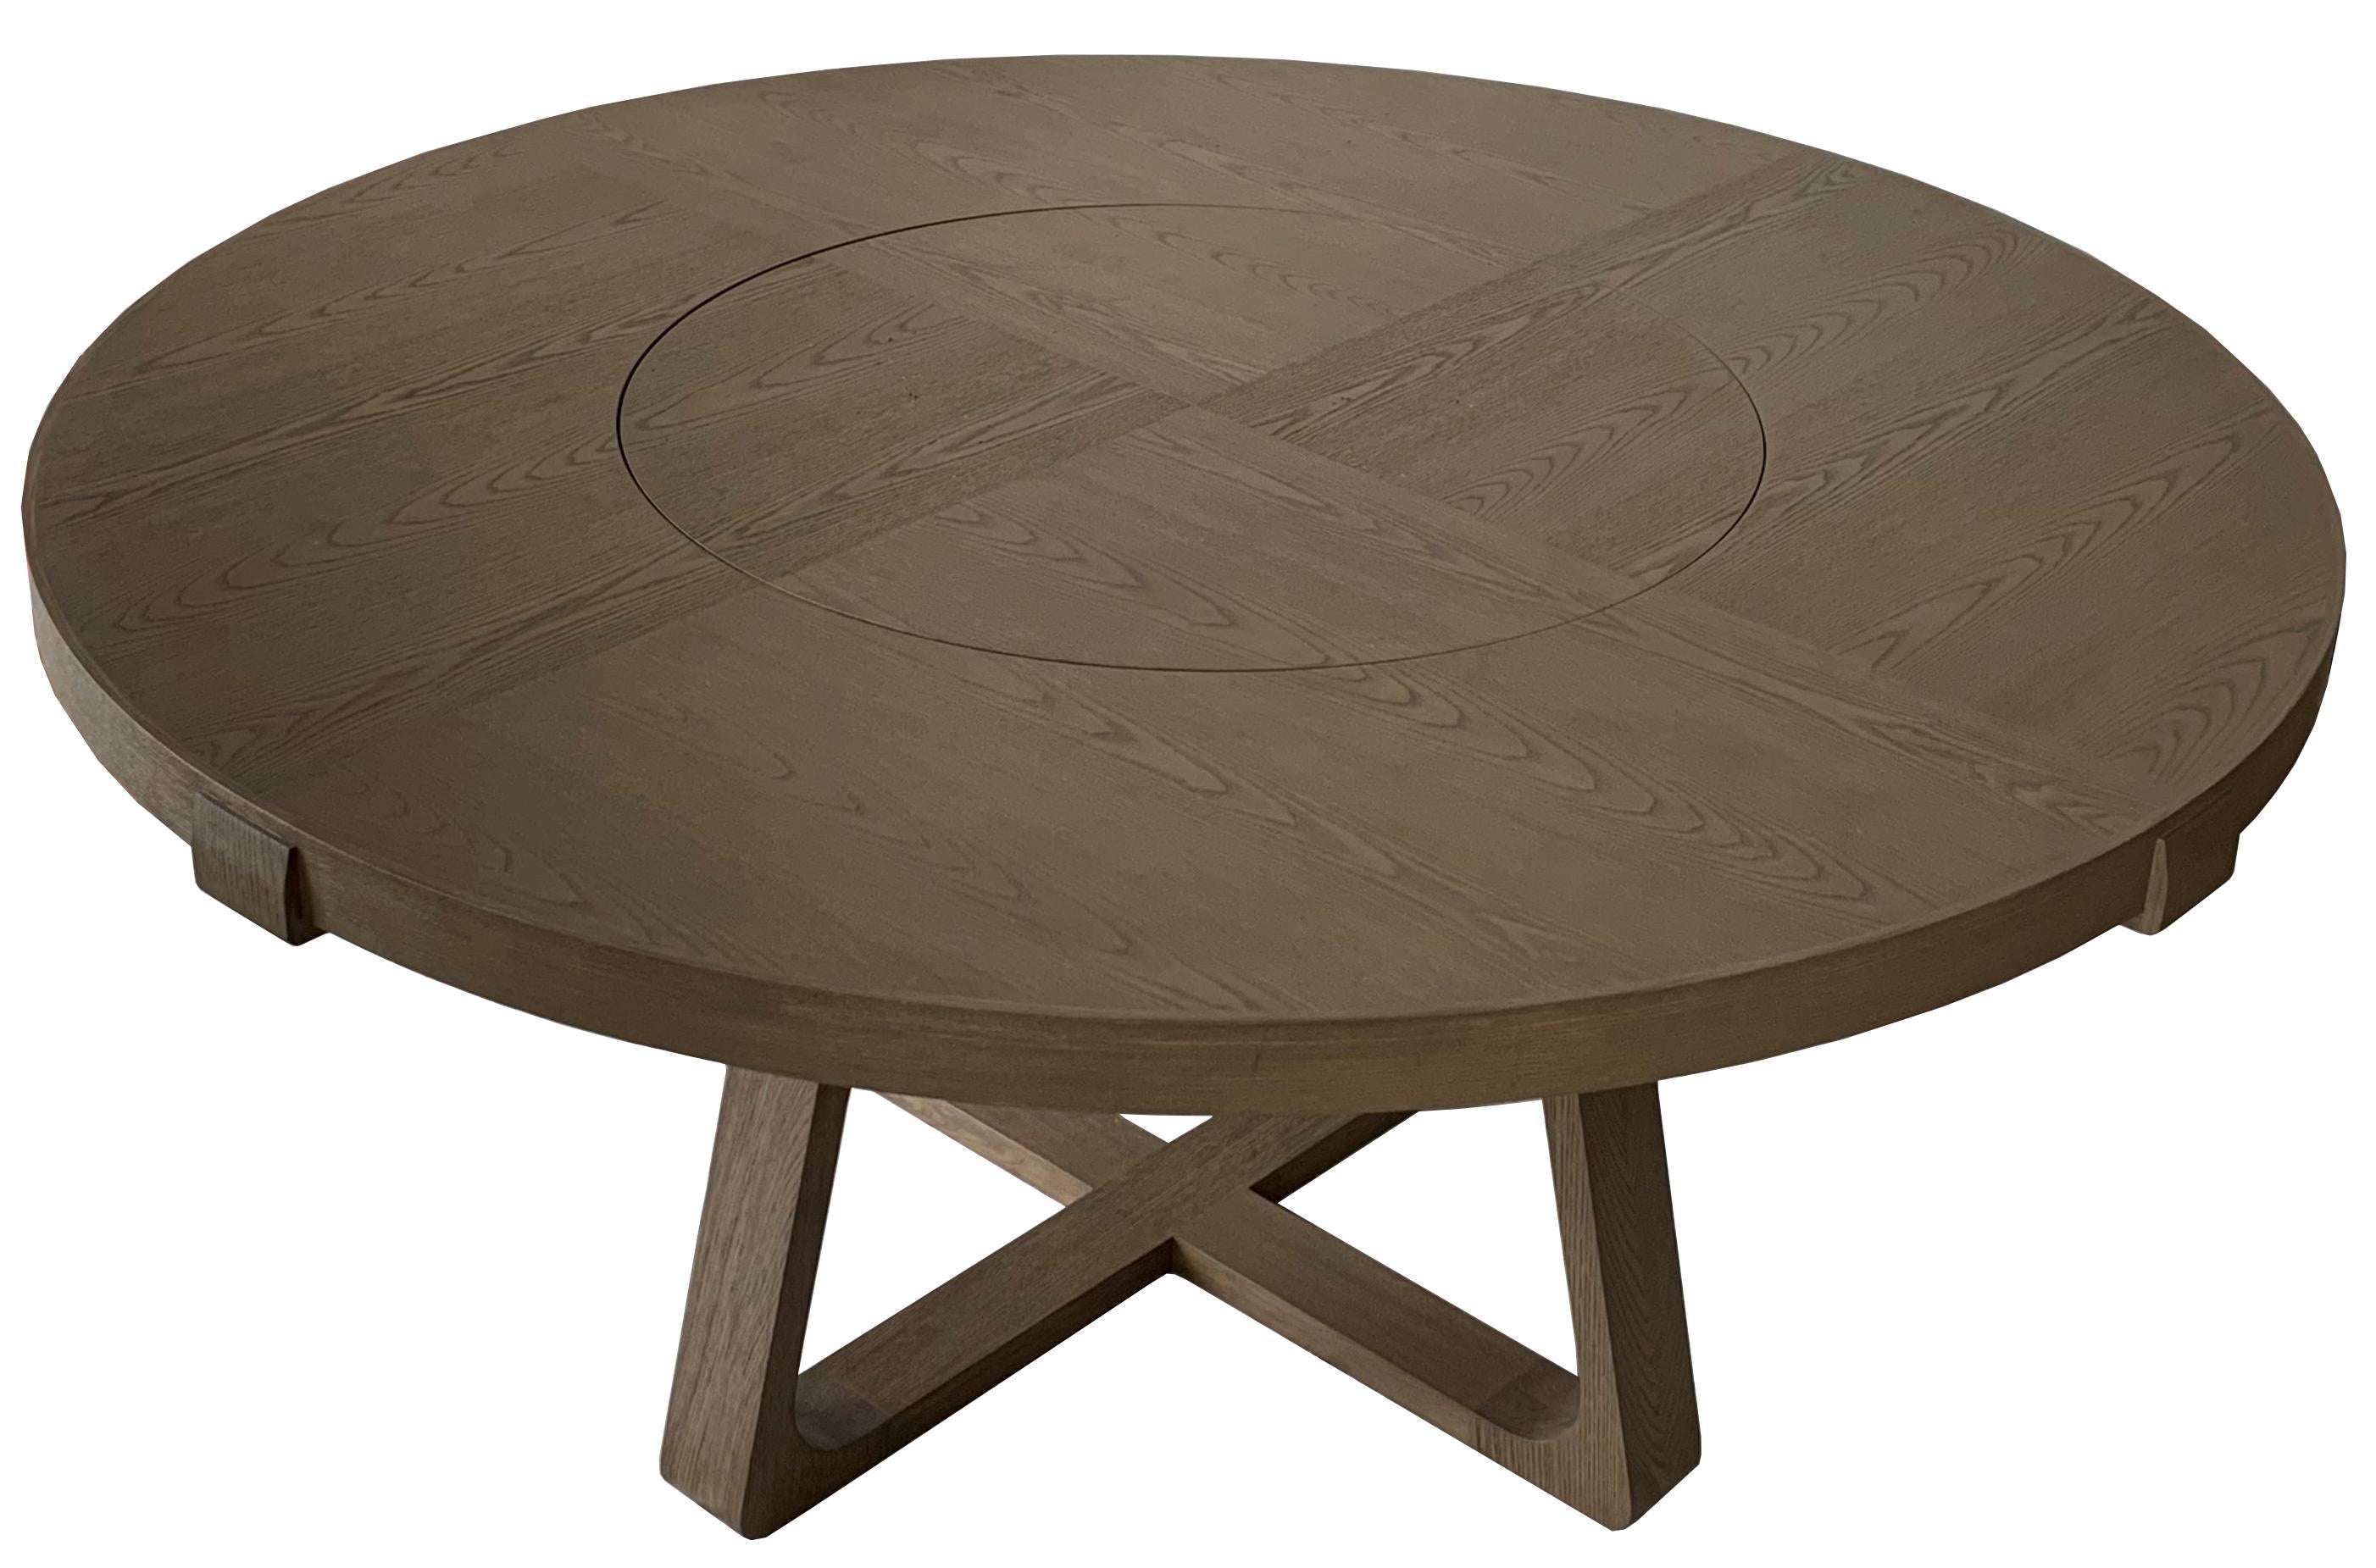 Description: Round dining table with lazy susan
Color: Grey
Size: 160 Ø x 73 H cm
Material: Oak
Collection: Interlock

Round wooden dining table 160cm with lazy susan in the middle.
Removable lazy susan for cleaning purpose.
Available other sizes